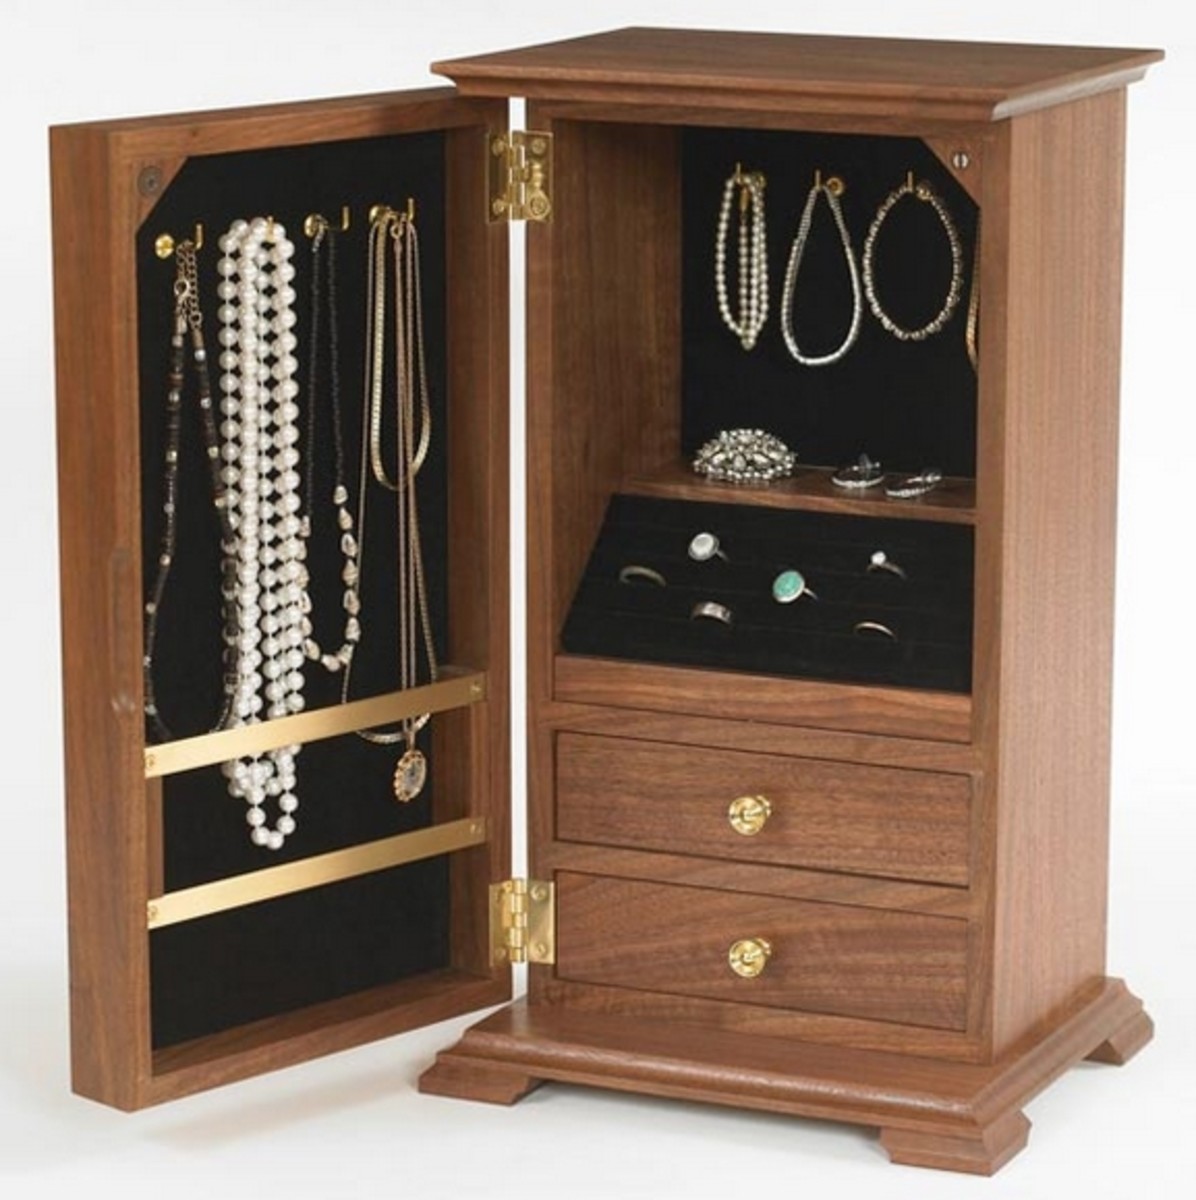 Sample Jewelry Chest or Armoire